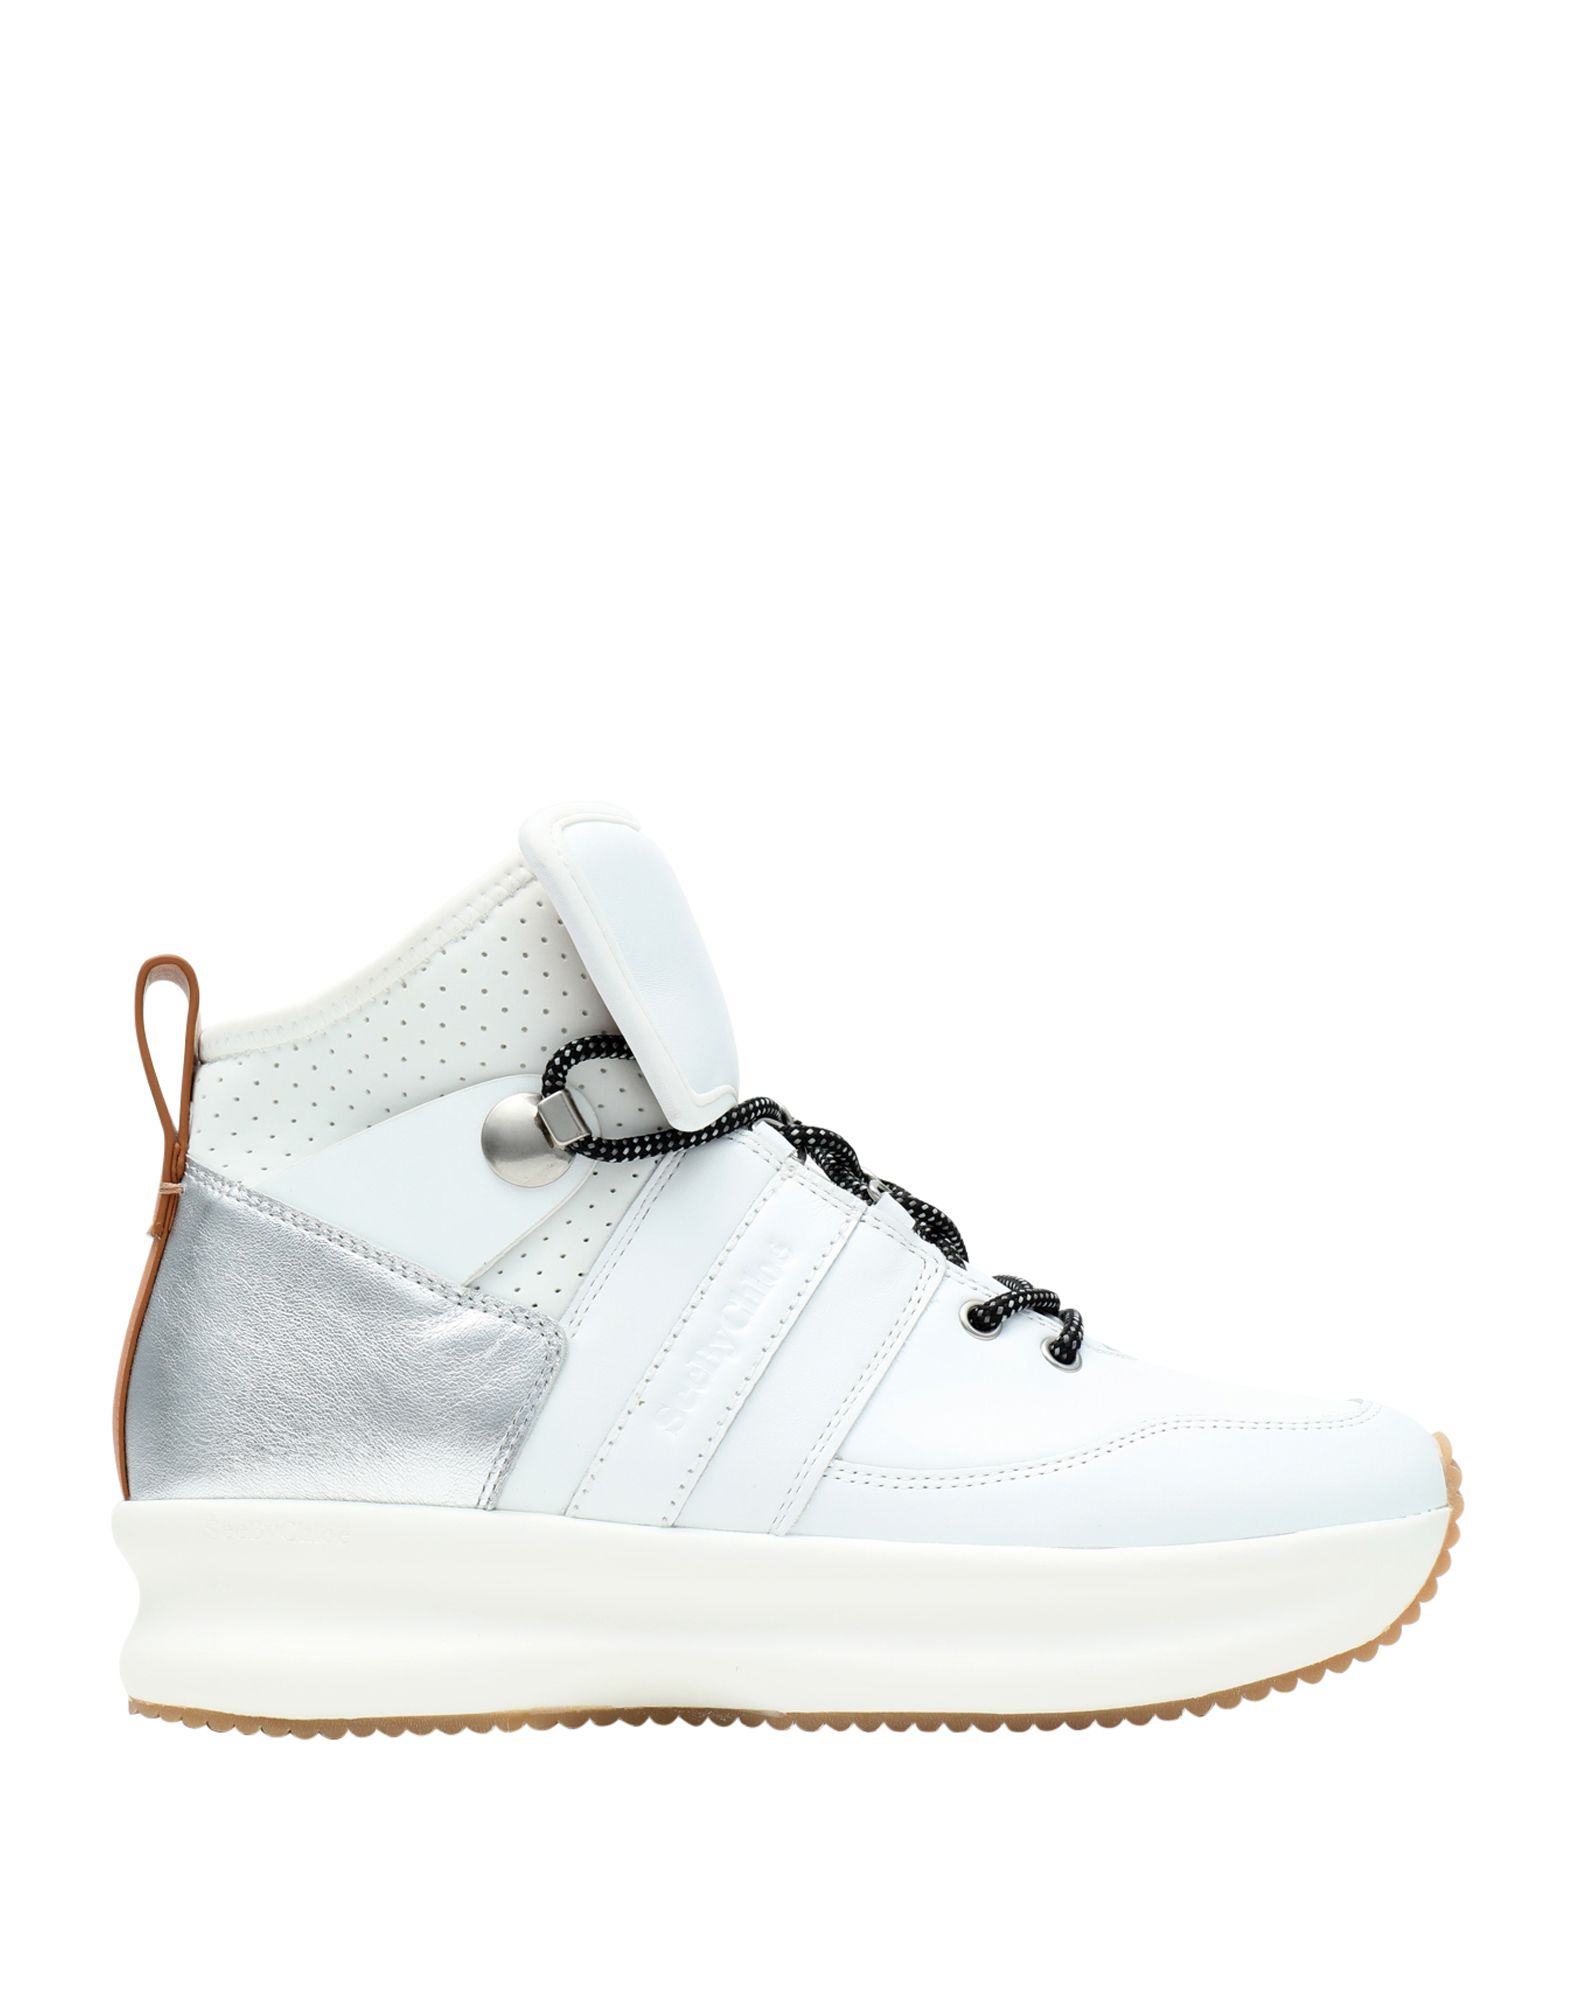 SEE BY CHLOÉ SEE BY CHLOÉ WOMAN SNEAKERS WHITE SIZE 9 SOFT LEATHER, TEXTILE FIBERS,11671027XV 9